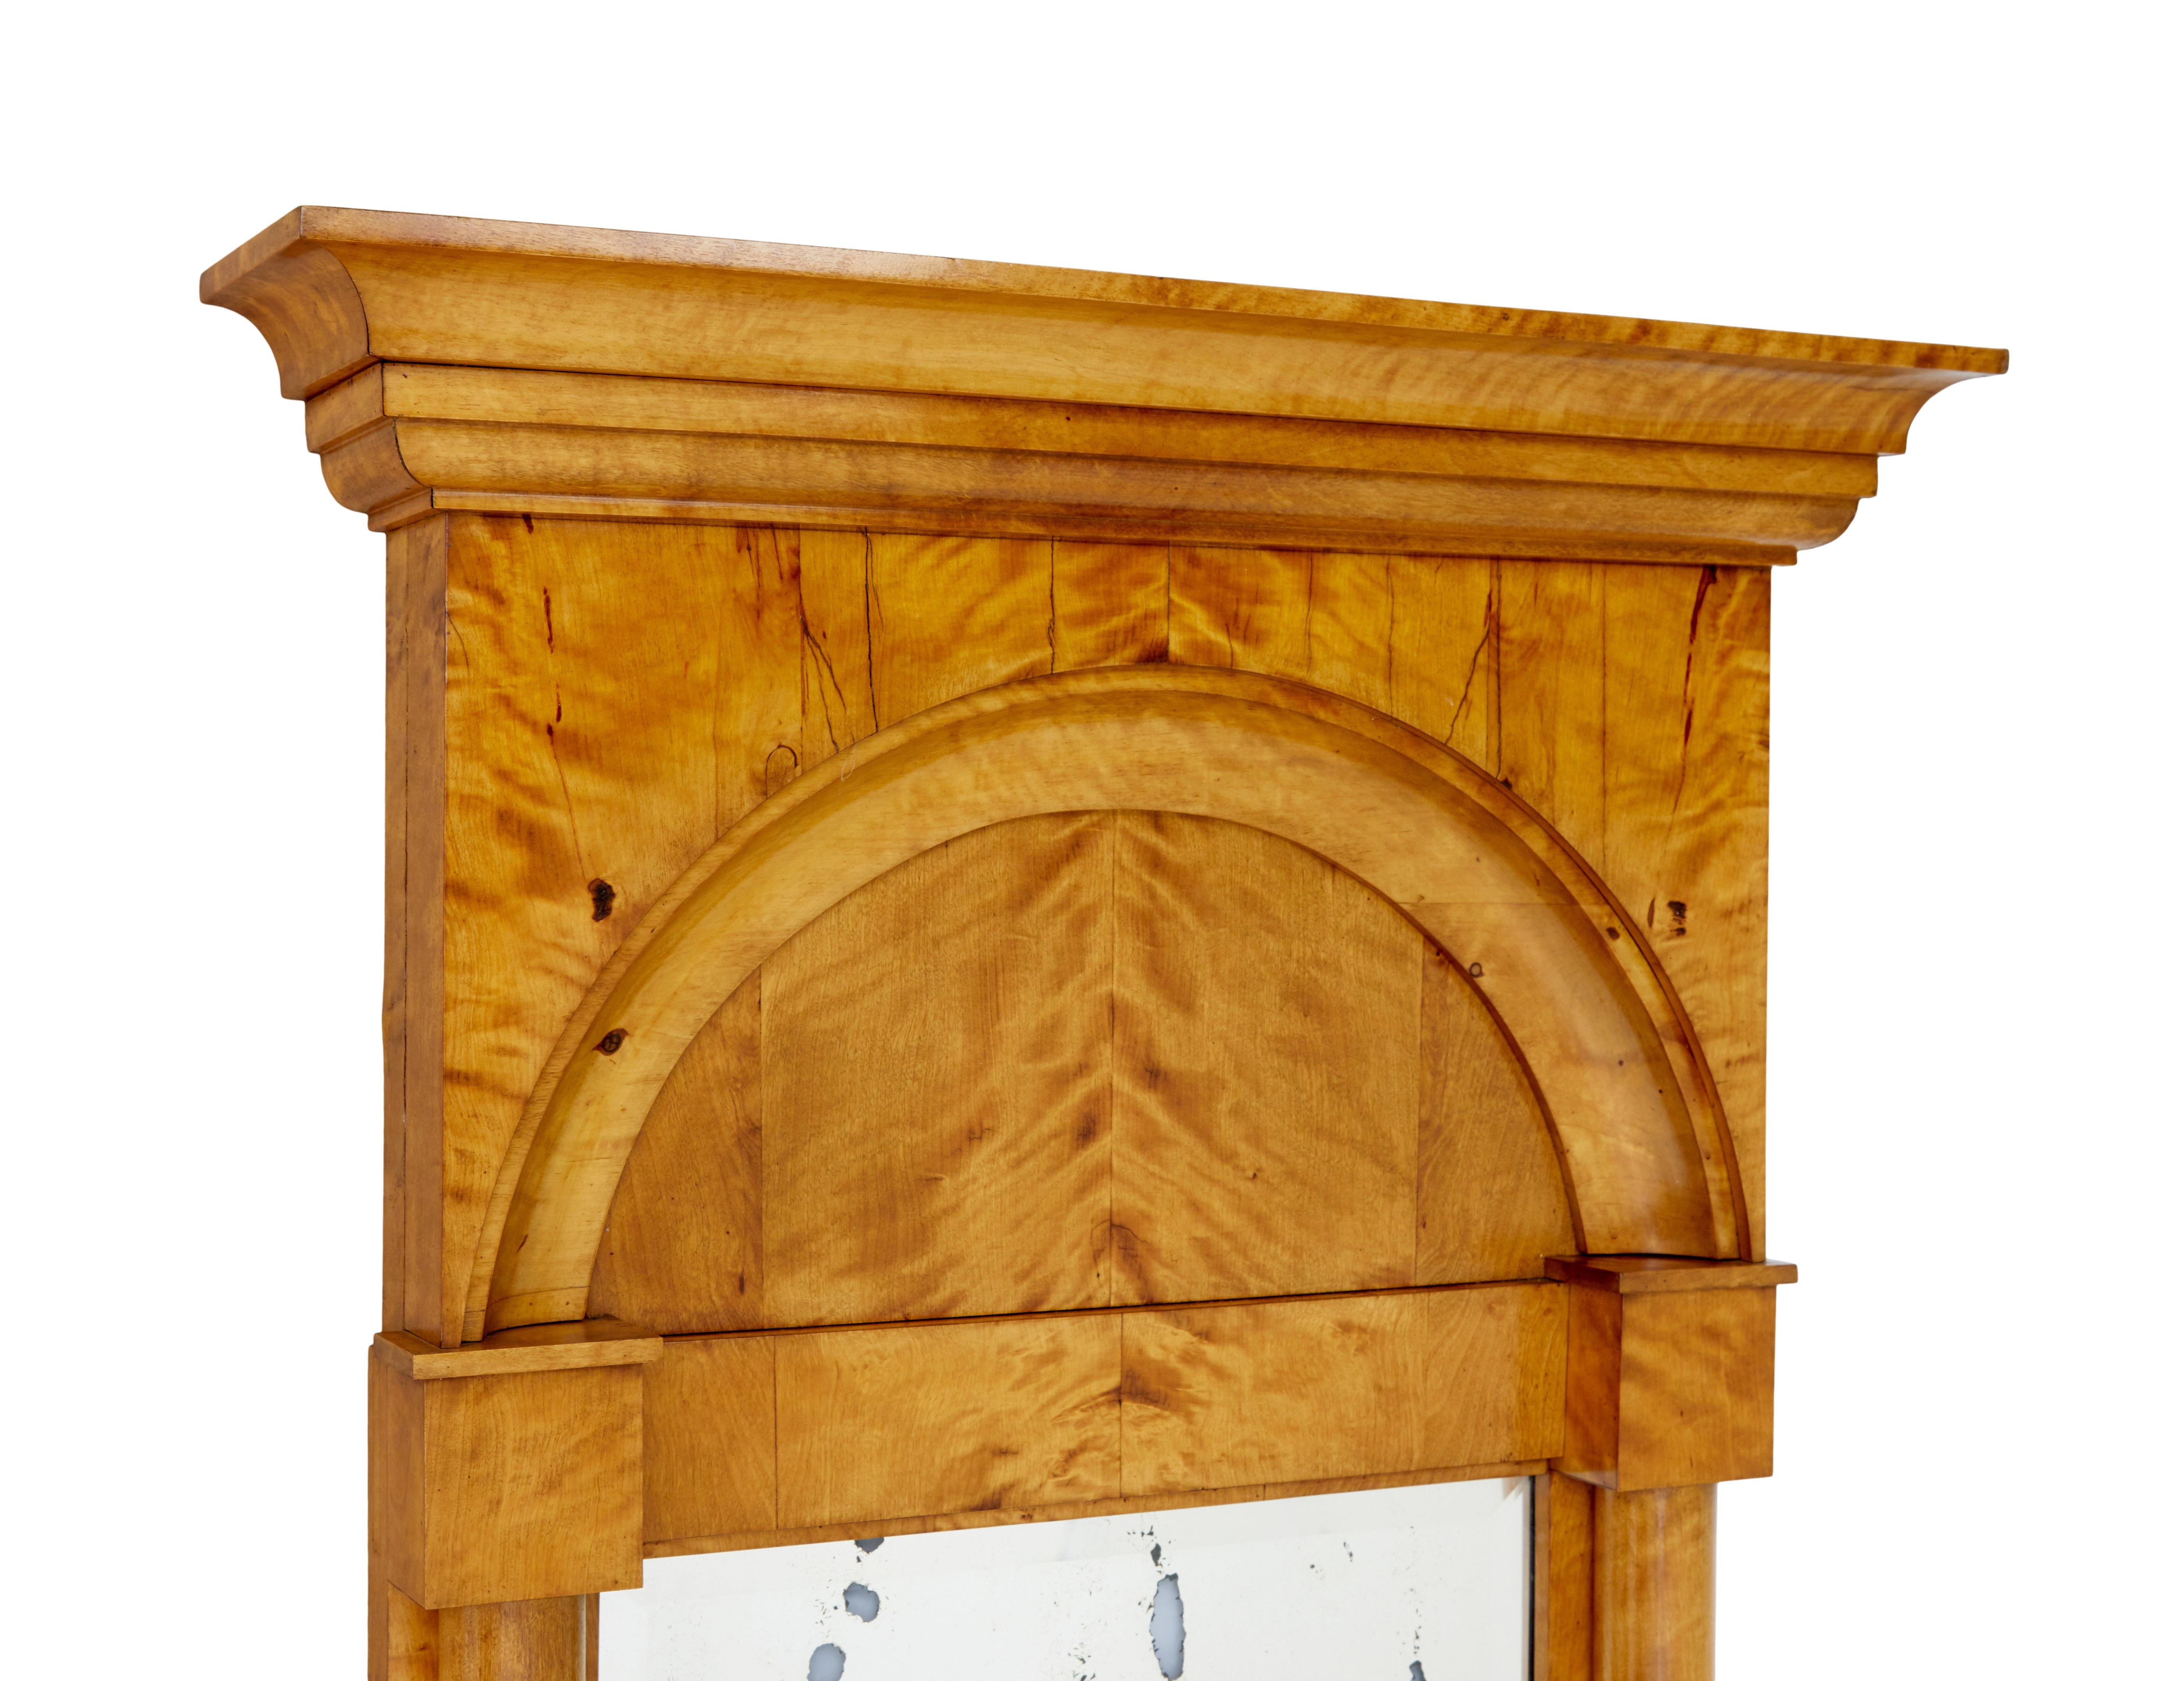 Late 19th century Swedish empire revival birch pier mirror circa 1890.

Fine architectural pier mirror made in birch.

Rich golden empire revival birch, with architectural cornice.  Moulded arch which links the 2 columns that flow down either side